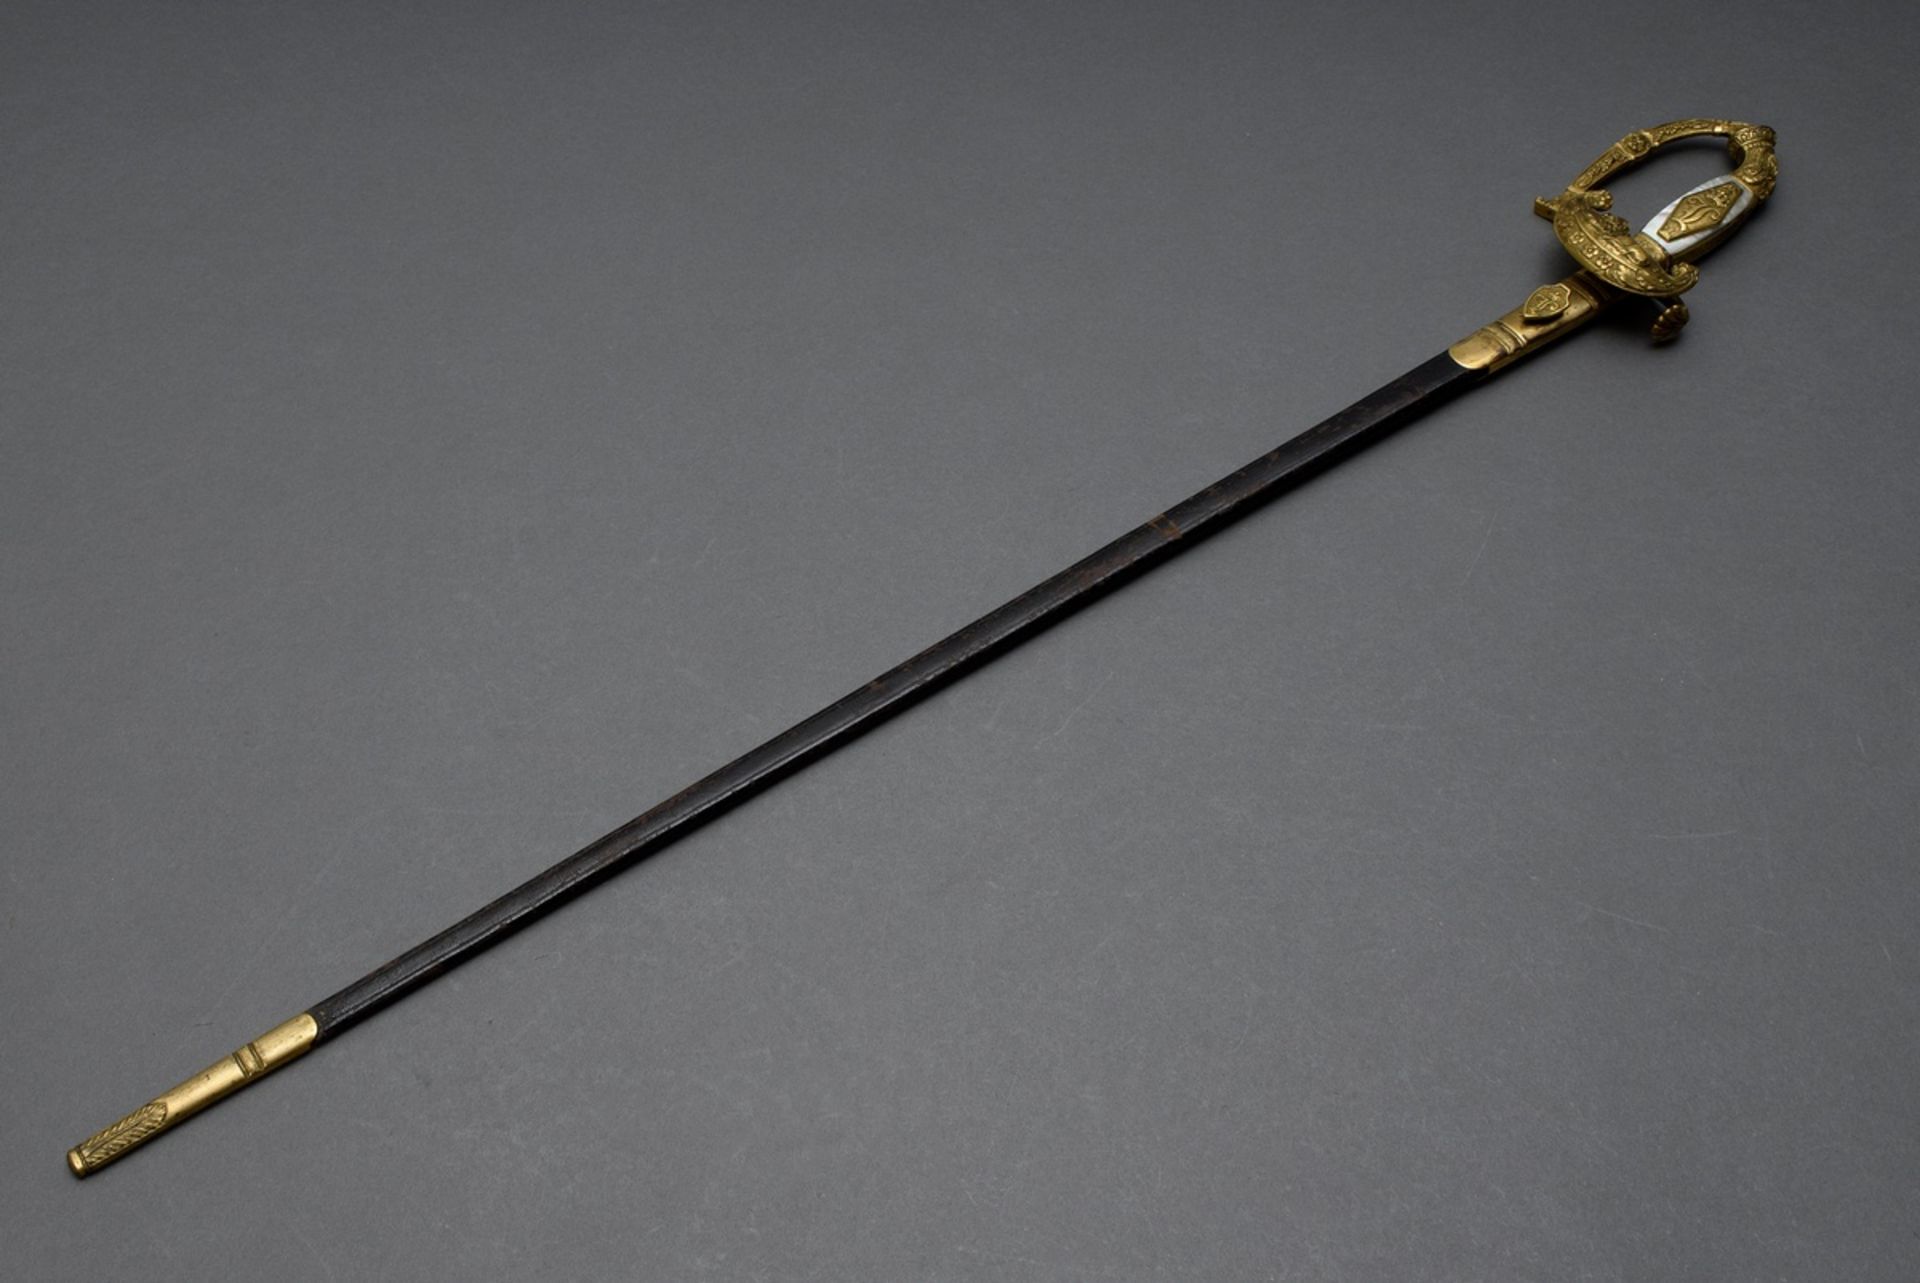 Bavarian civil servant's sword from the reign of King Ludwig I (1825-1848) or King Ludwig II (1864- - Image 5 of 11